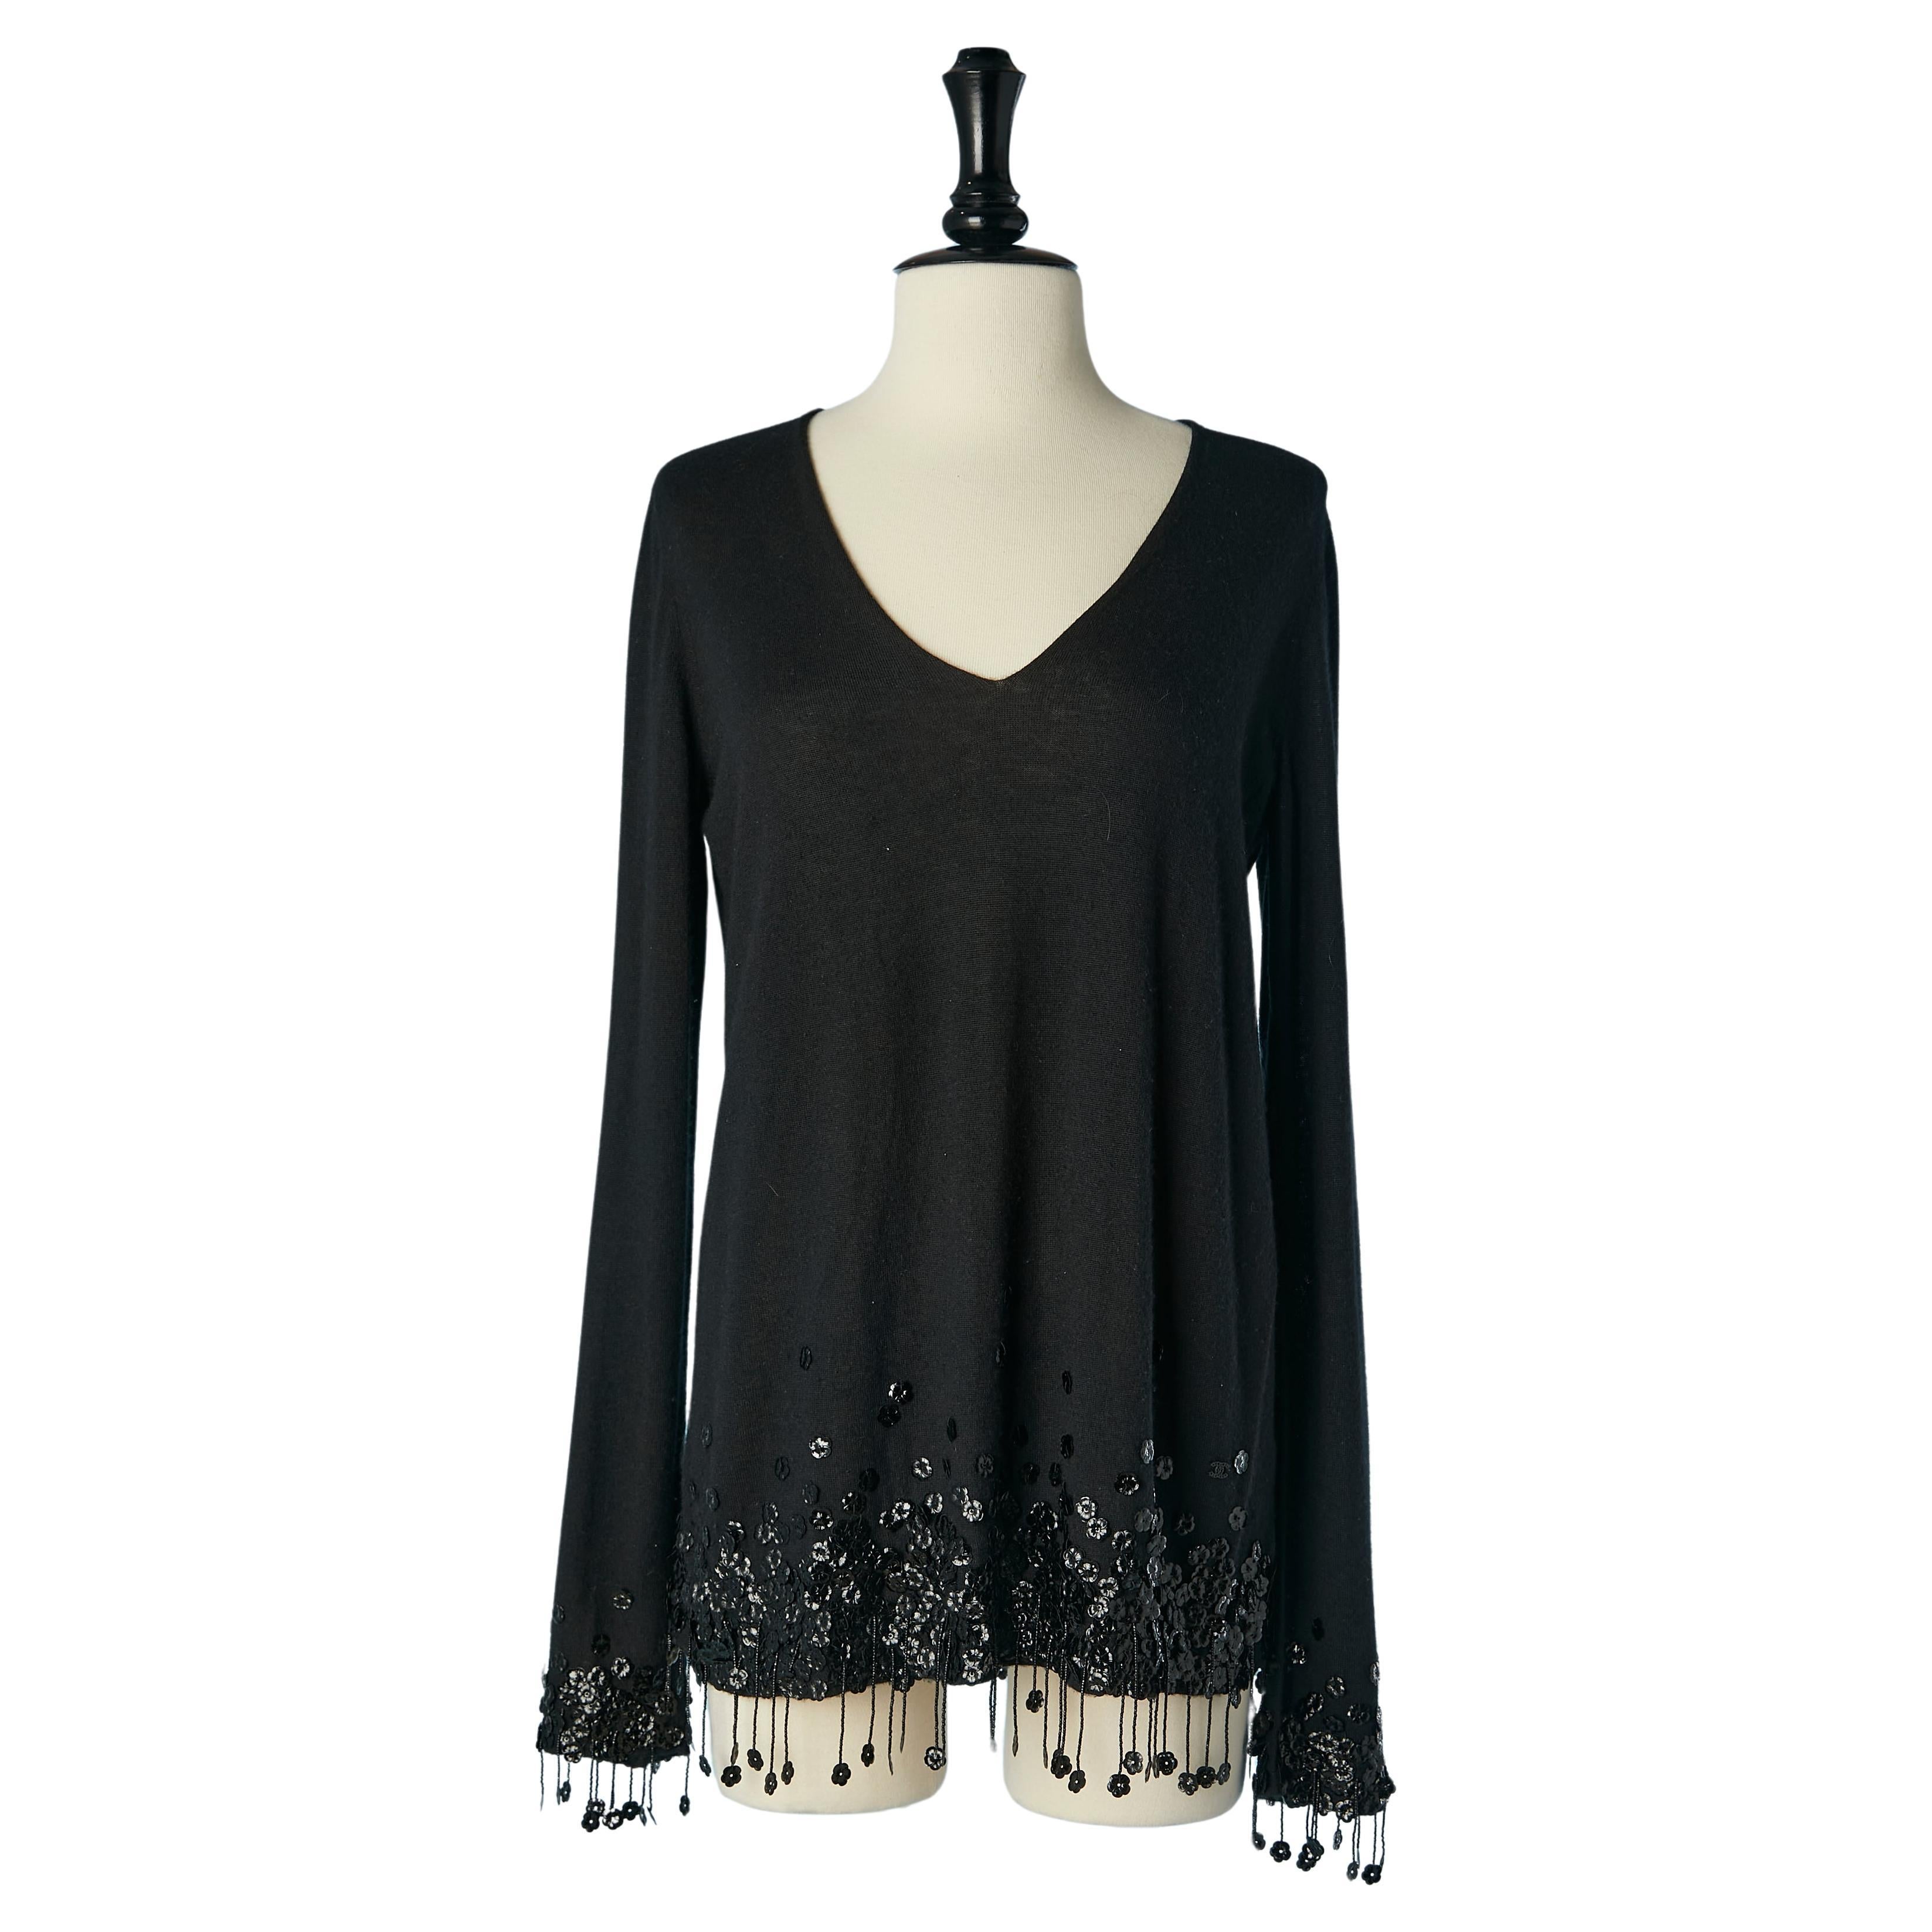 Black cashmere sweater with flowers and beads fringes embellishment Chanel 